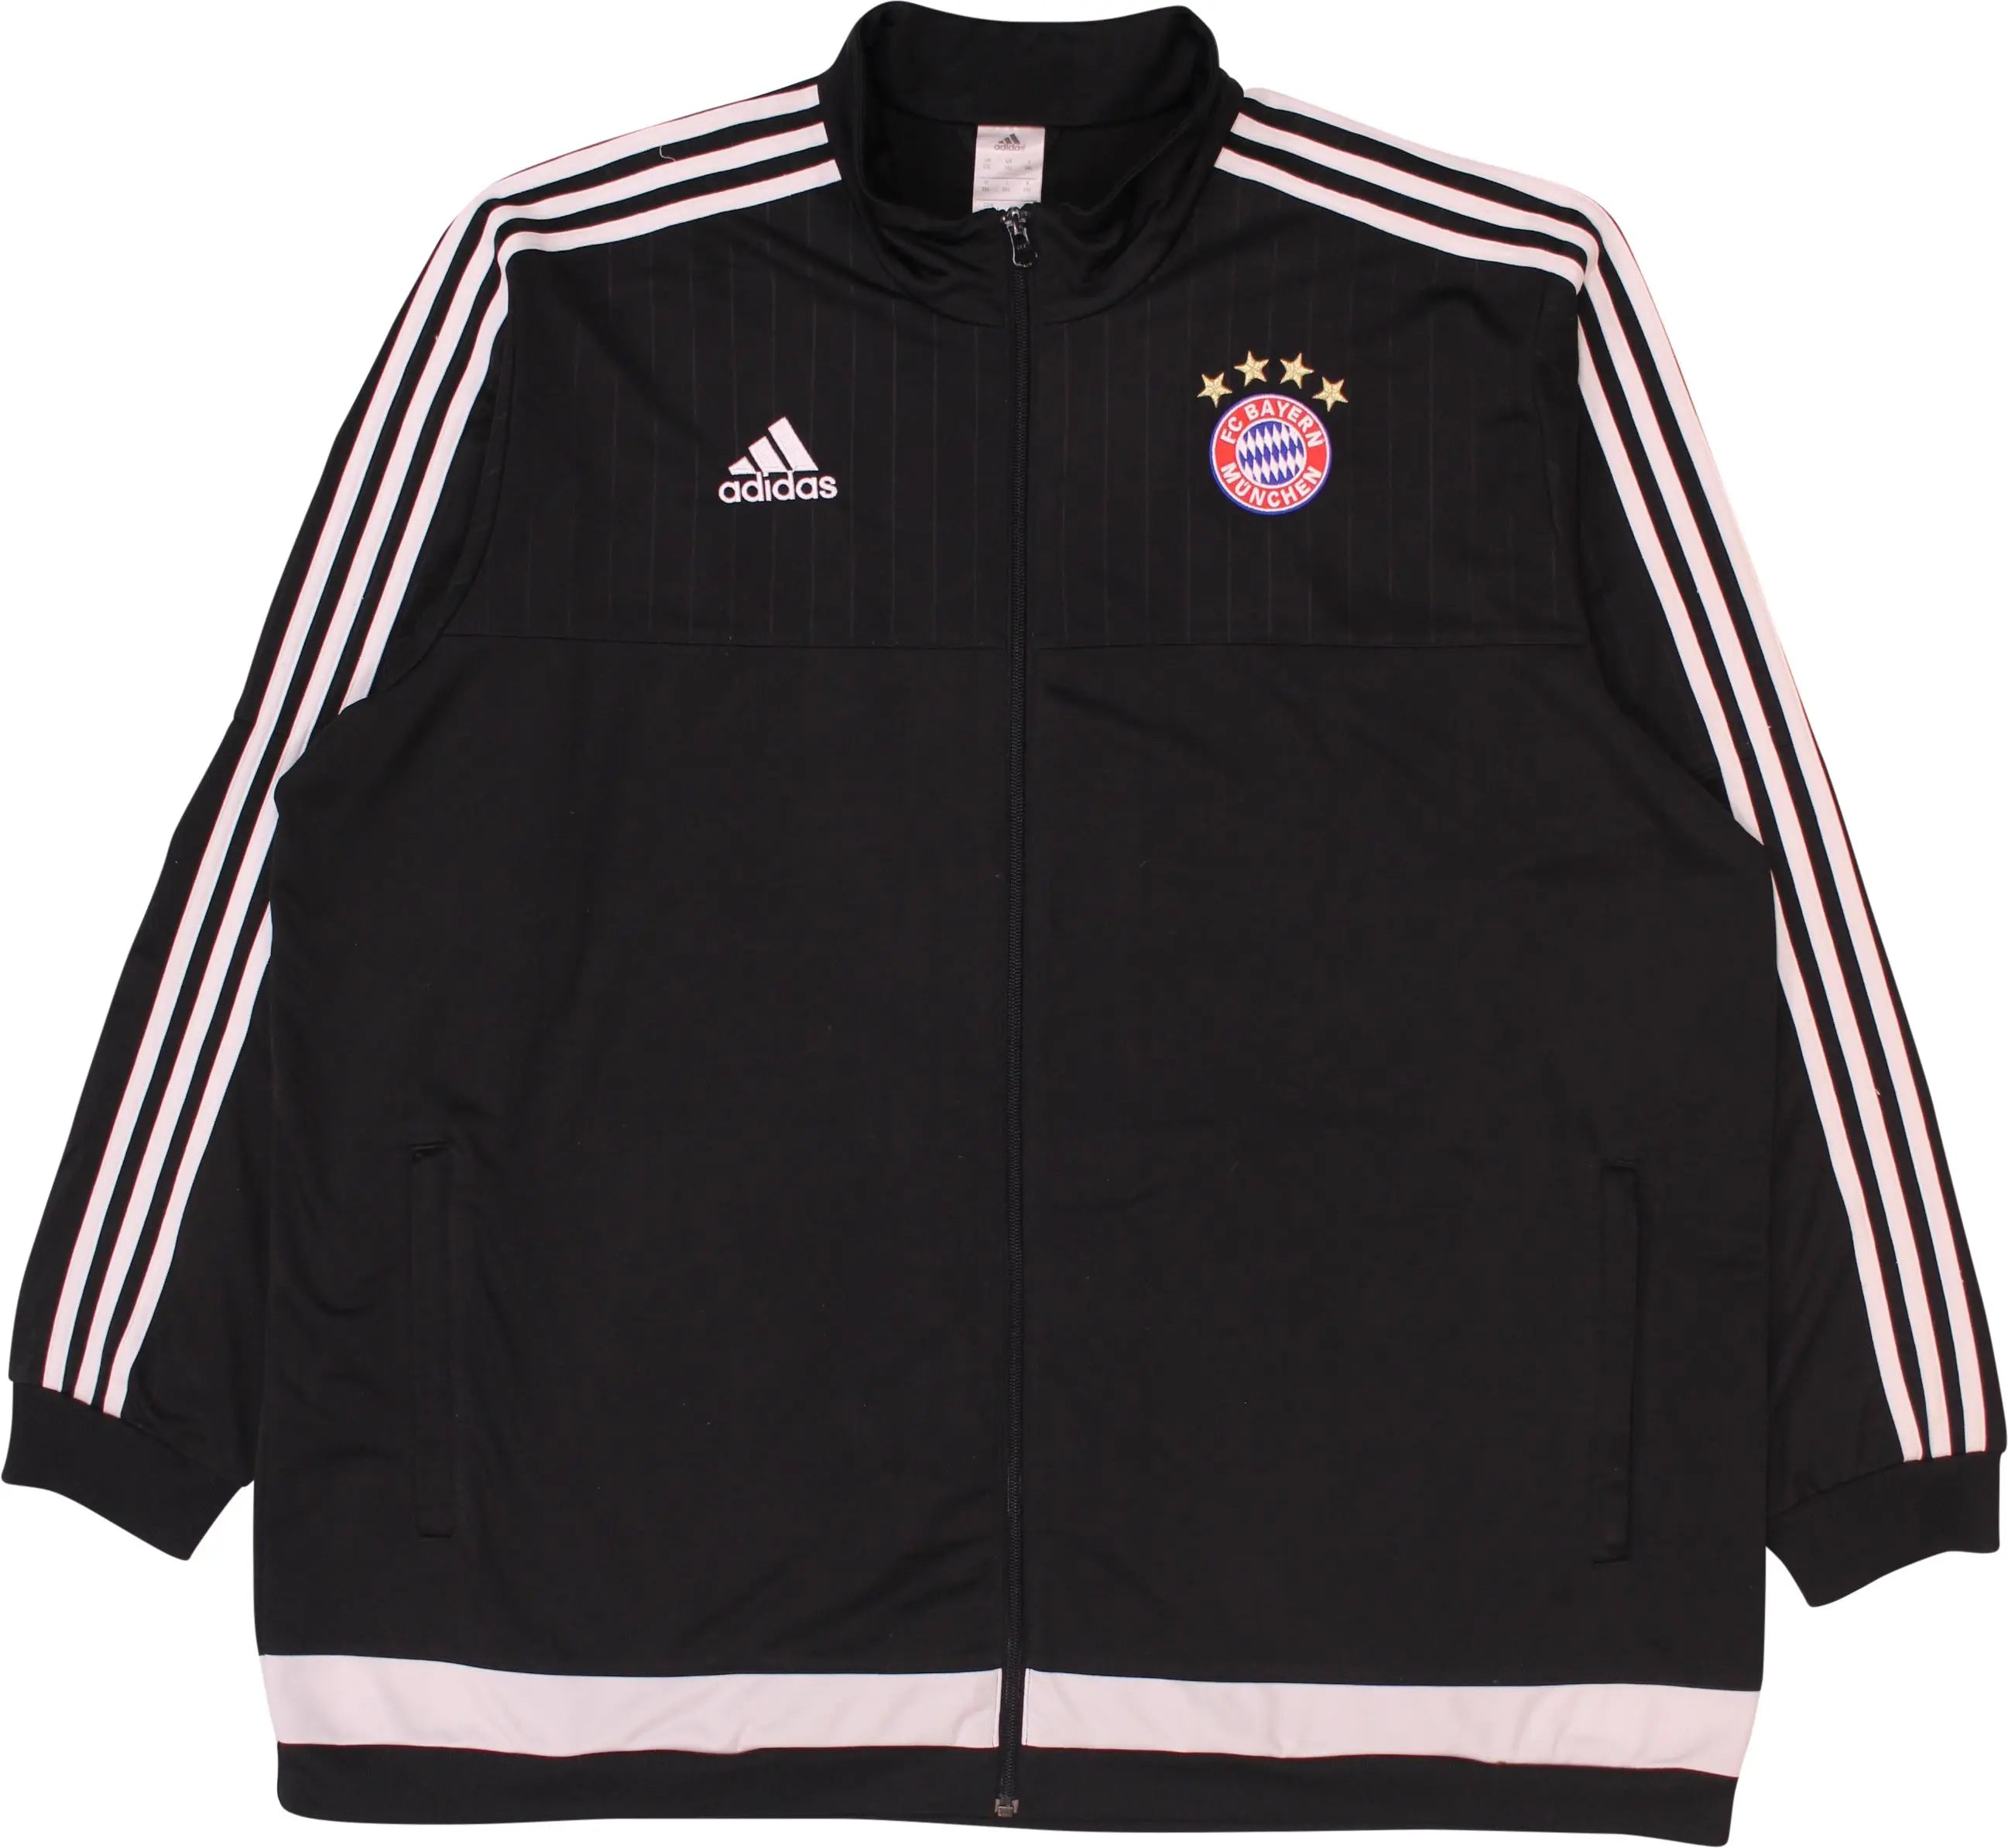 Adidas - Track Jacket 'Bayern Munchen' by Adidas- ThriftTale.com - Vintage and second handclothing